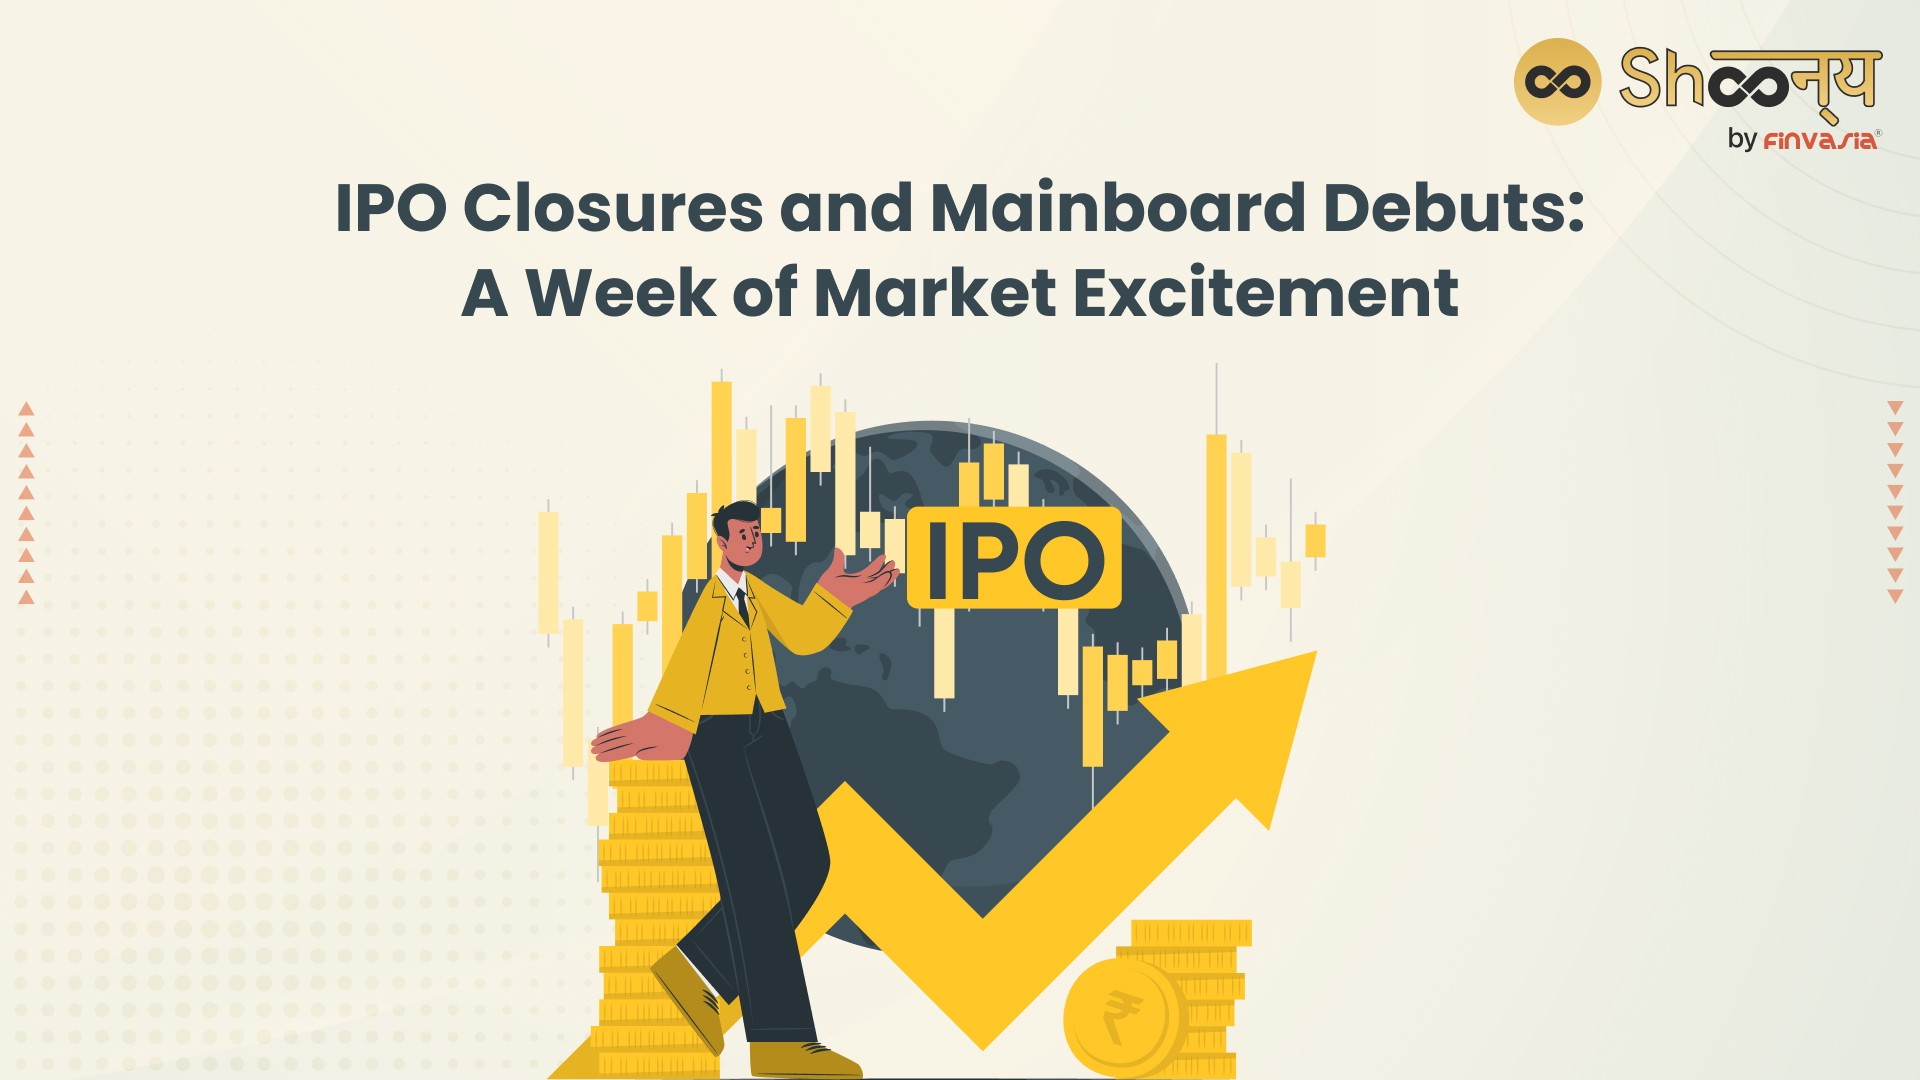 IPO Closings and Mainboard Debuts: Know the Key Highlights